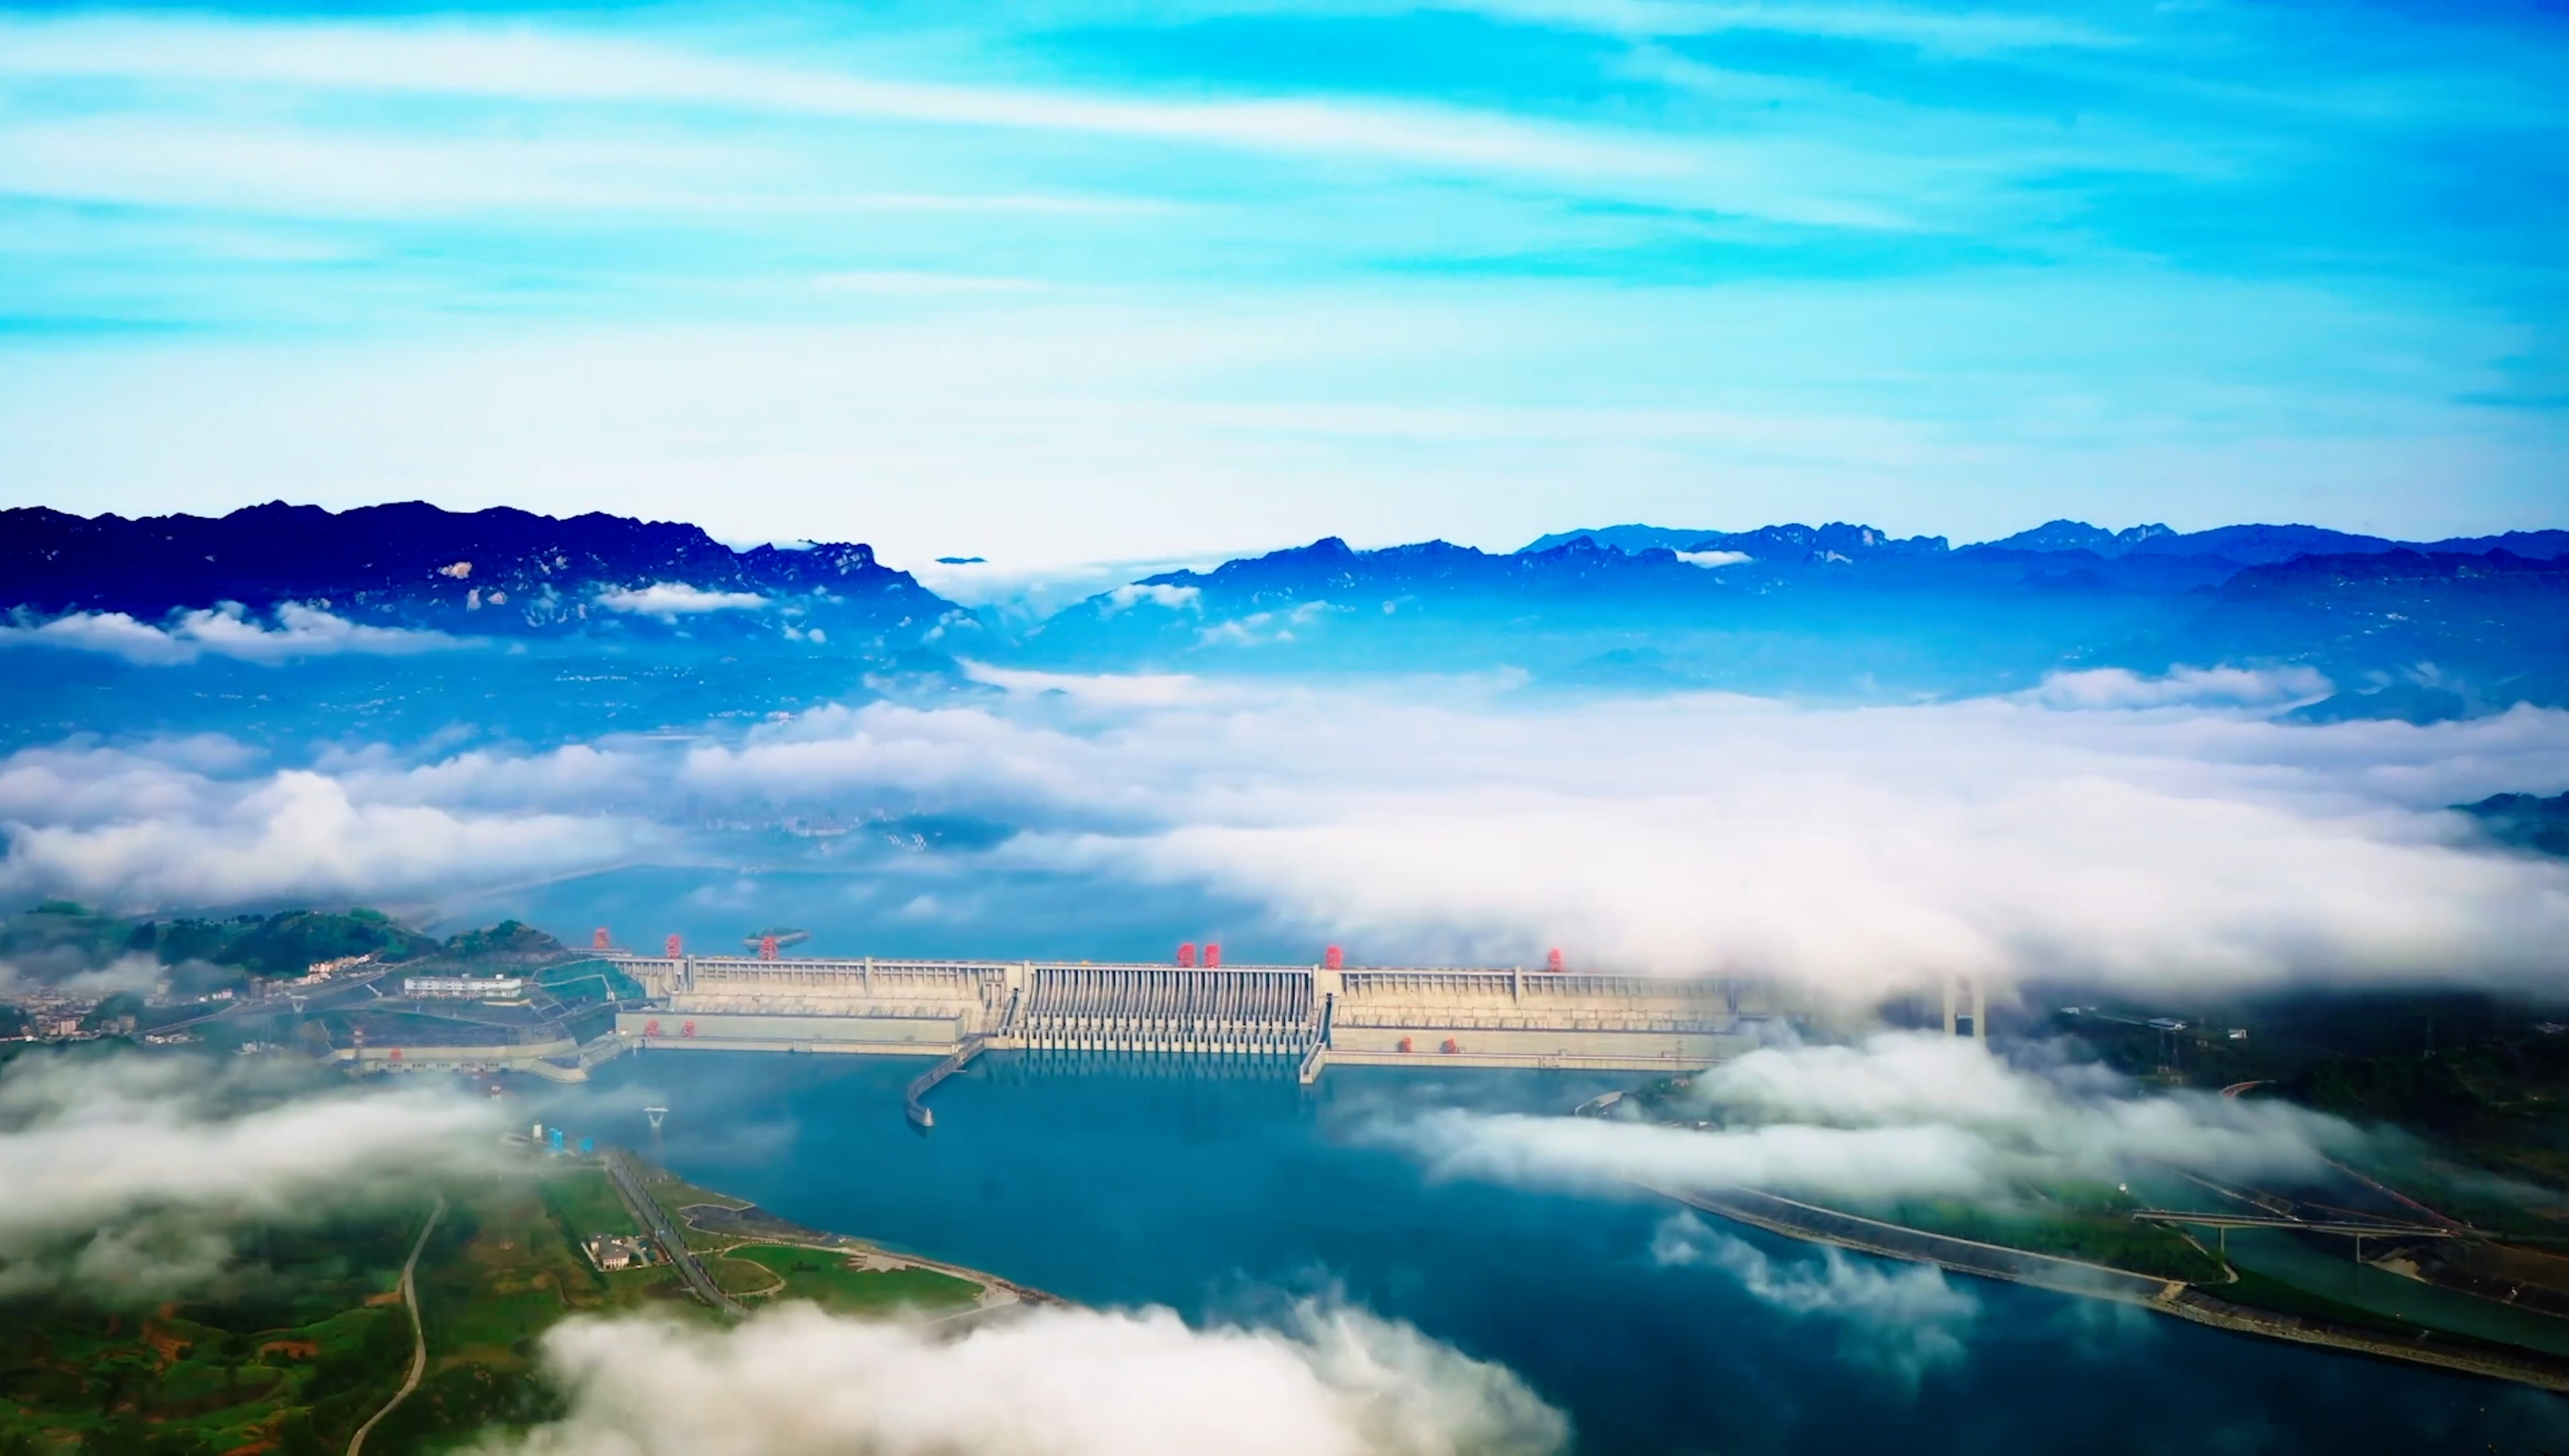 China’s Hydropower: Empowering a Clean and Beautiful World